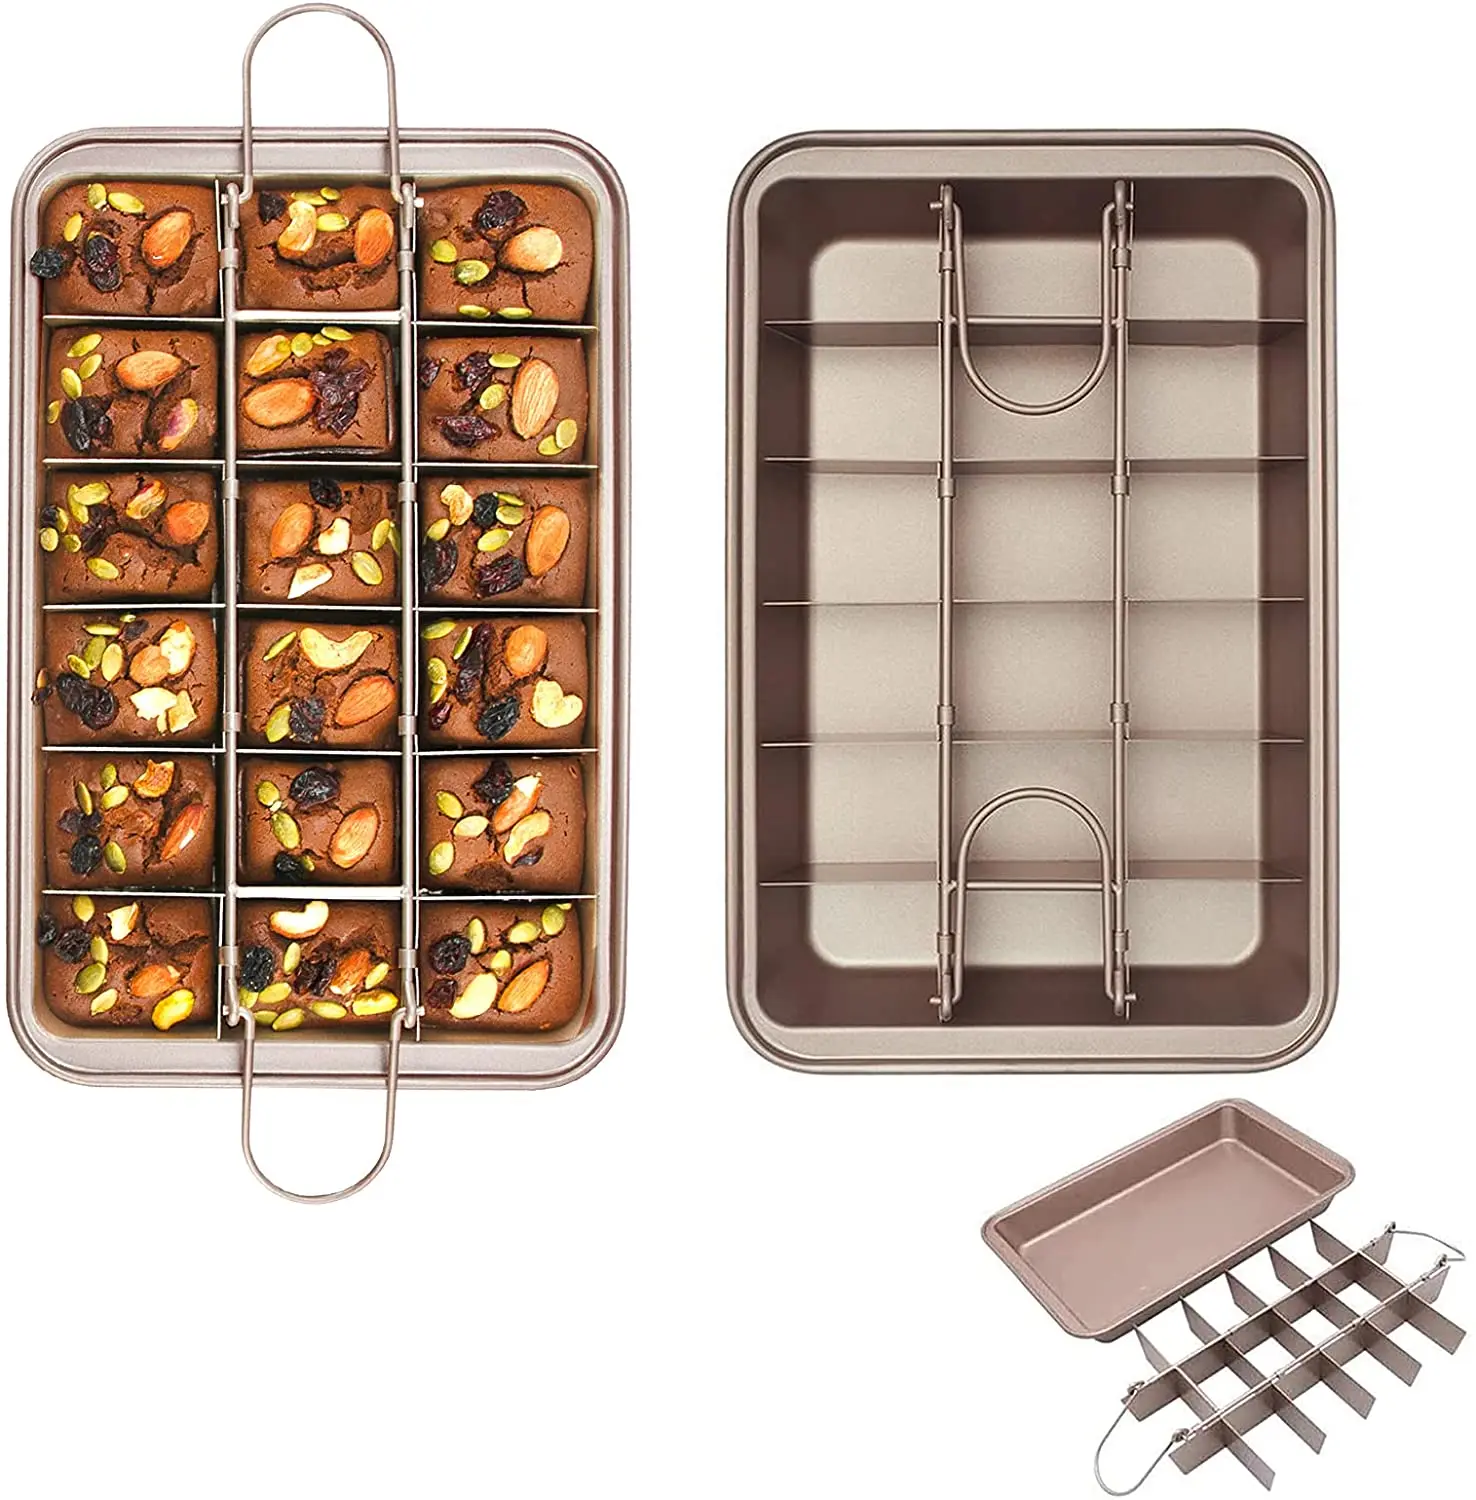 

brownie pan non stick brownie pans with dividers 18 pre-slice brownie baking tray carbon steel bakeware for oven baking size 12